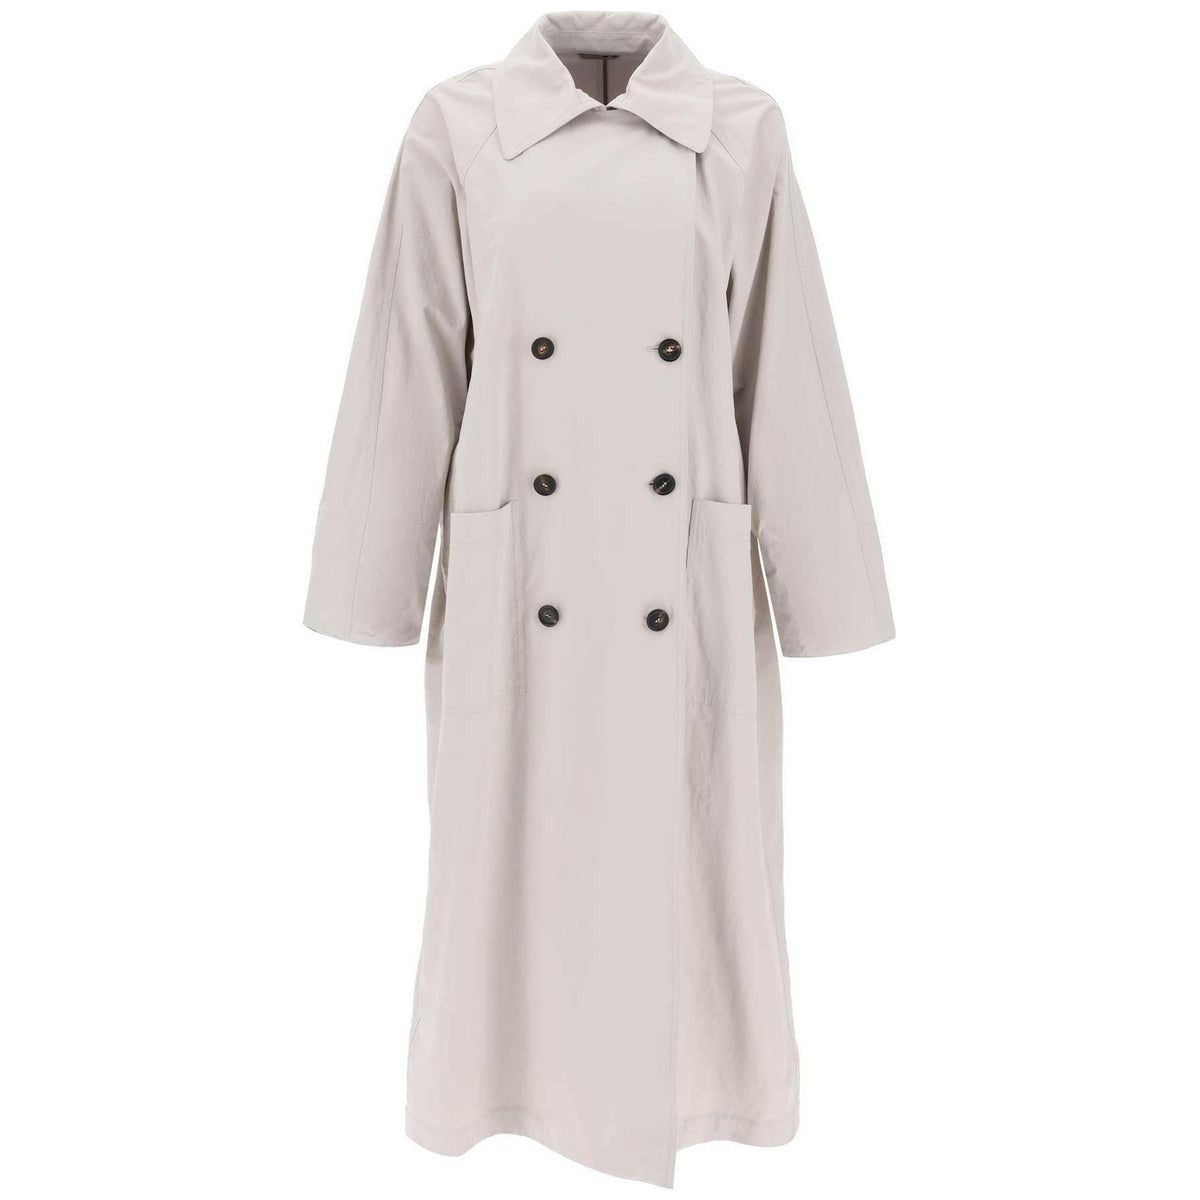 BRUNELLO CUCINELLI - Double-Breasted Trench Coat With Shiny Cuff Details - JOHN JULIA